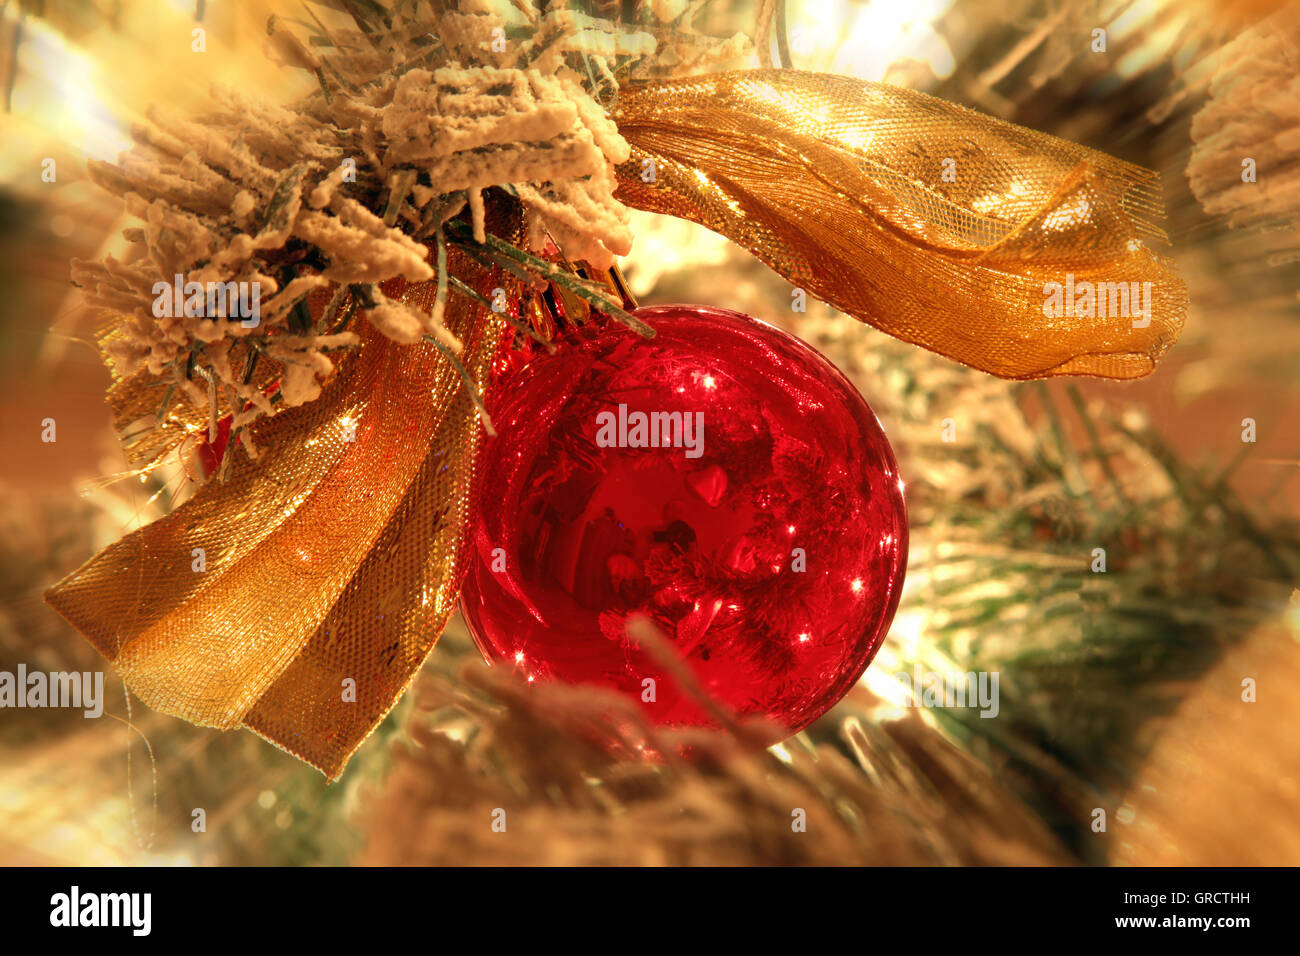 Red Christmas Tree Ornament With Golden Colored Bow In An Illuminated Tree Stock Photo